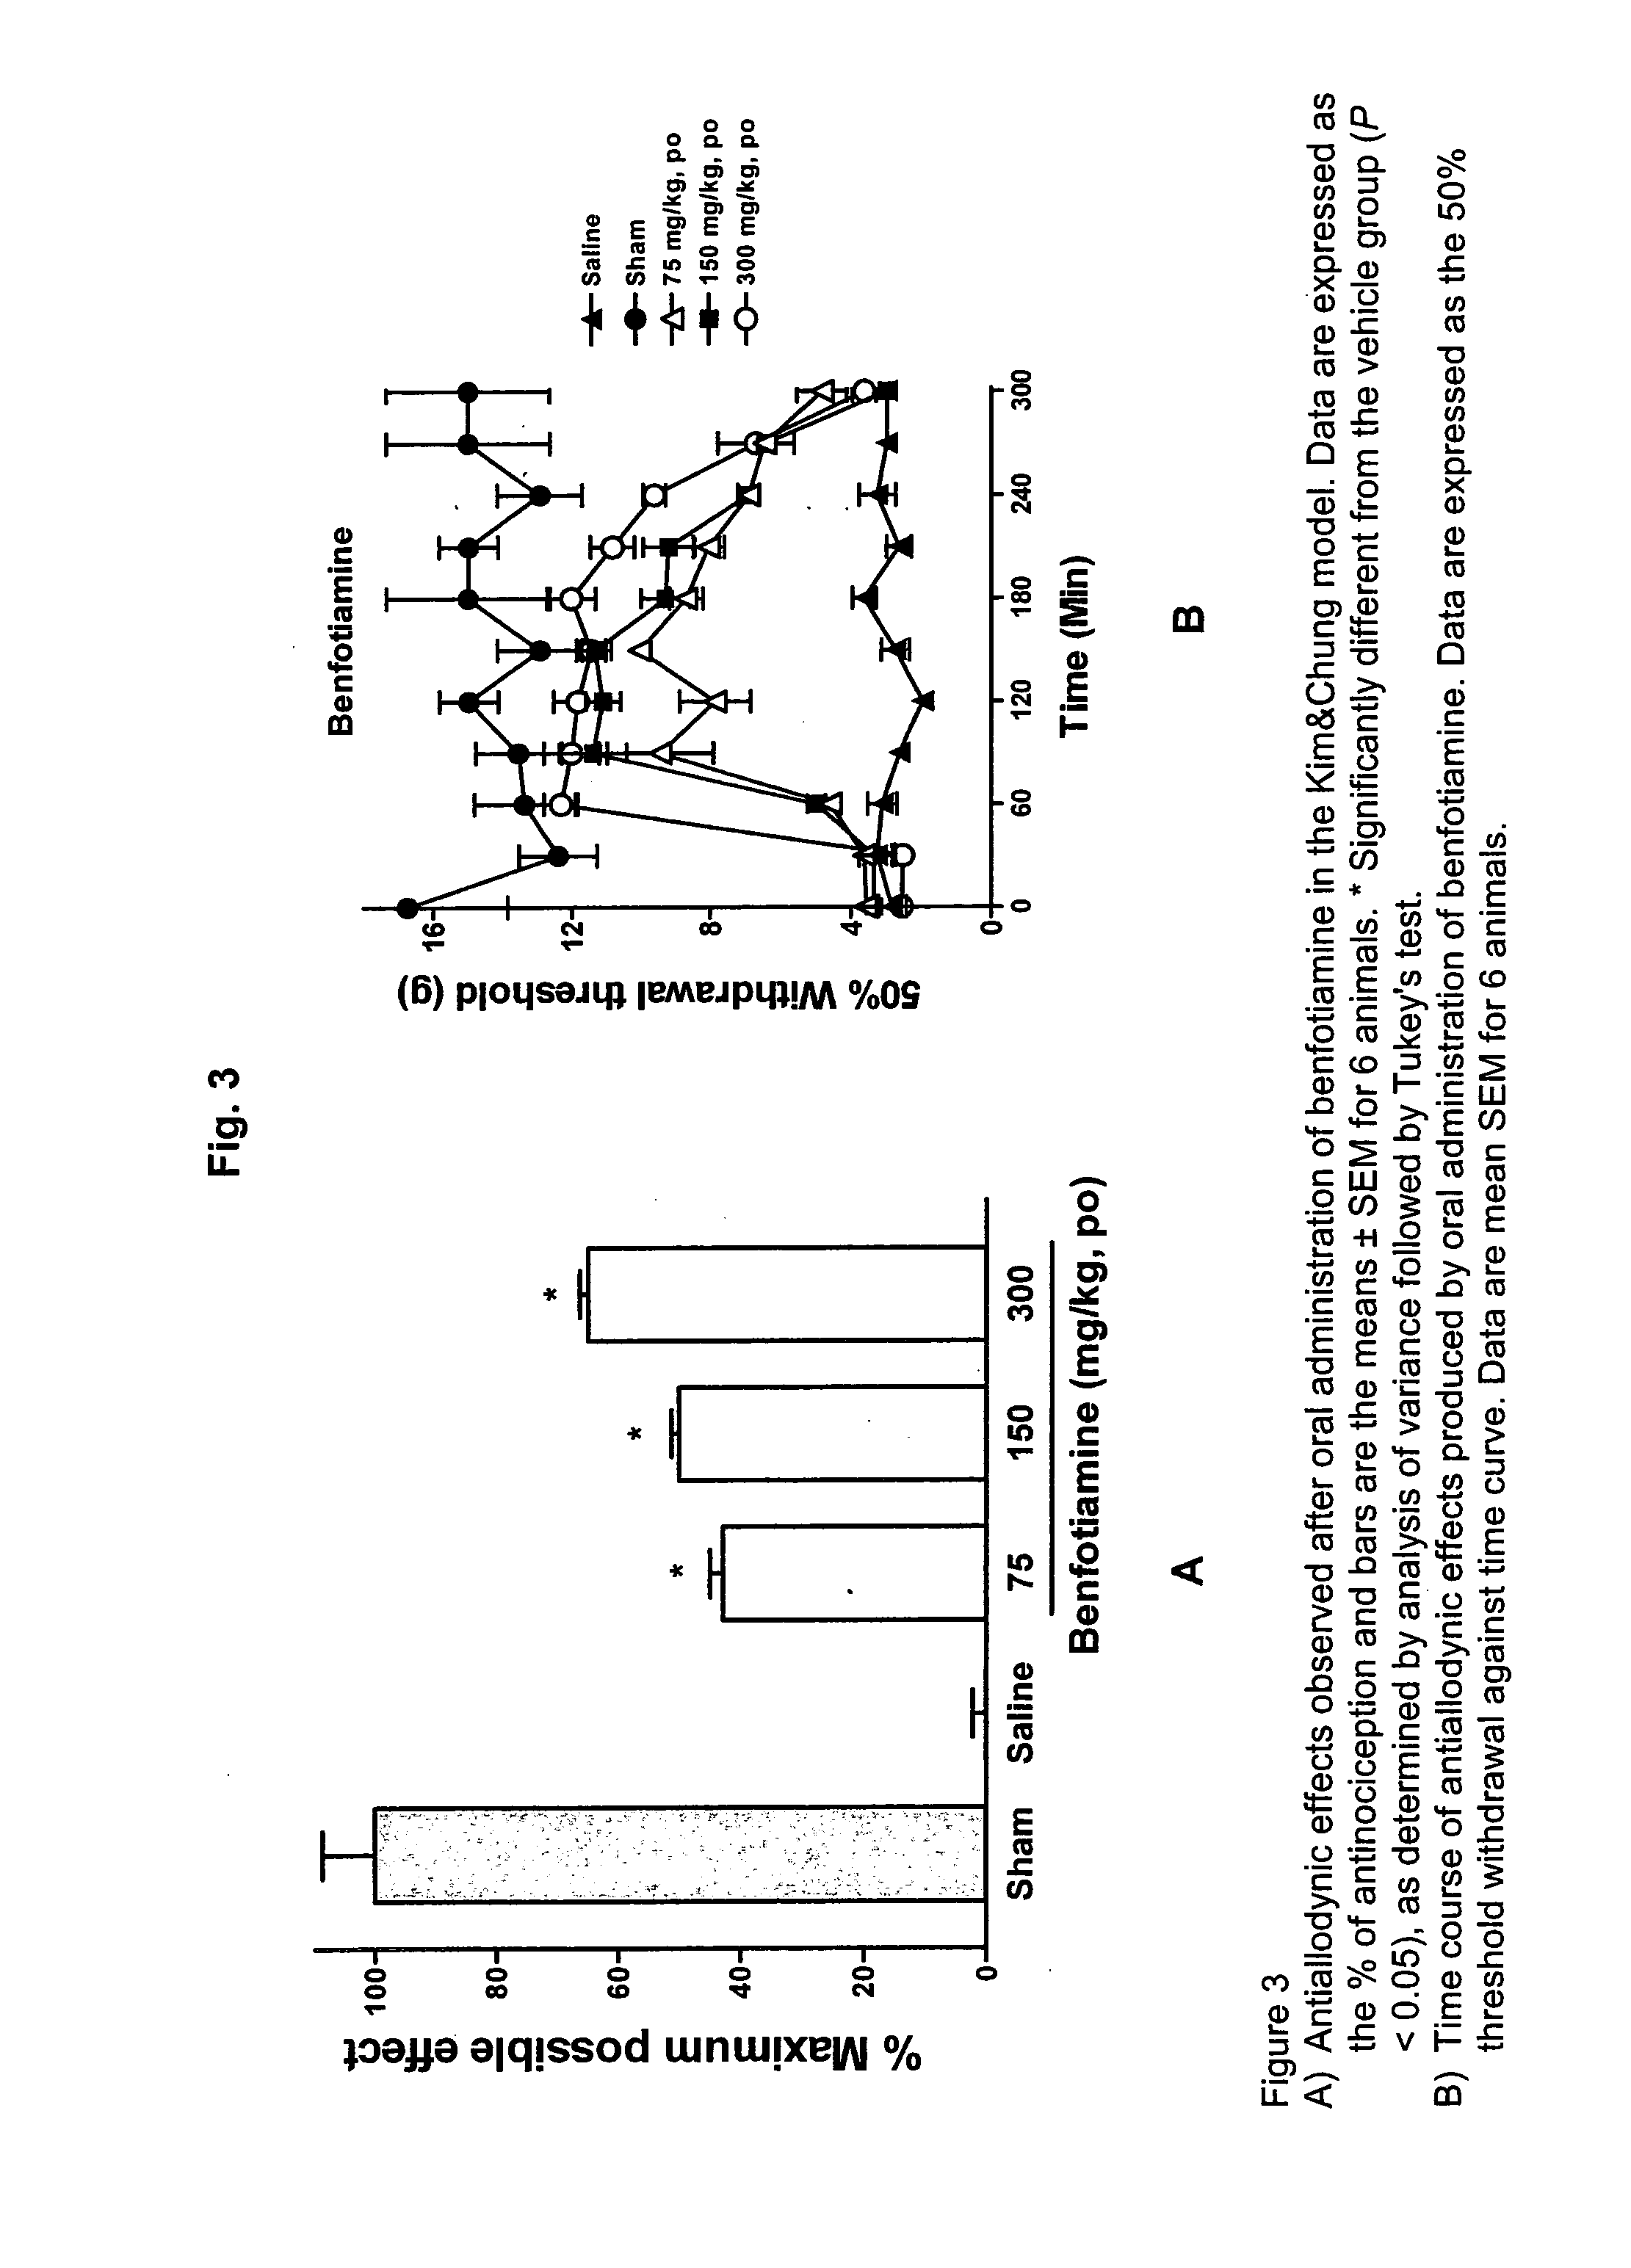 Pharmaceutical compositions containing benfotiamine and one or one more pharmaceutically active agents for the treatment of pain conditions of neuropathic origin